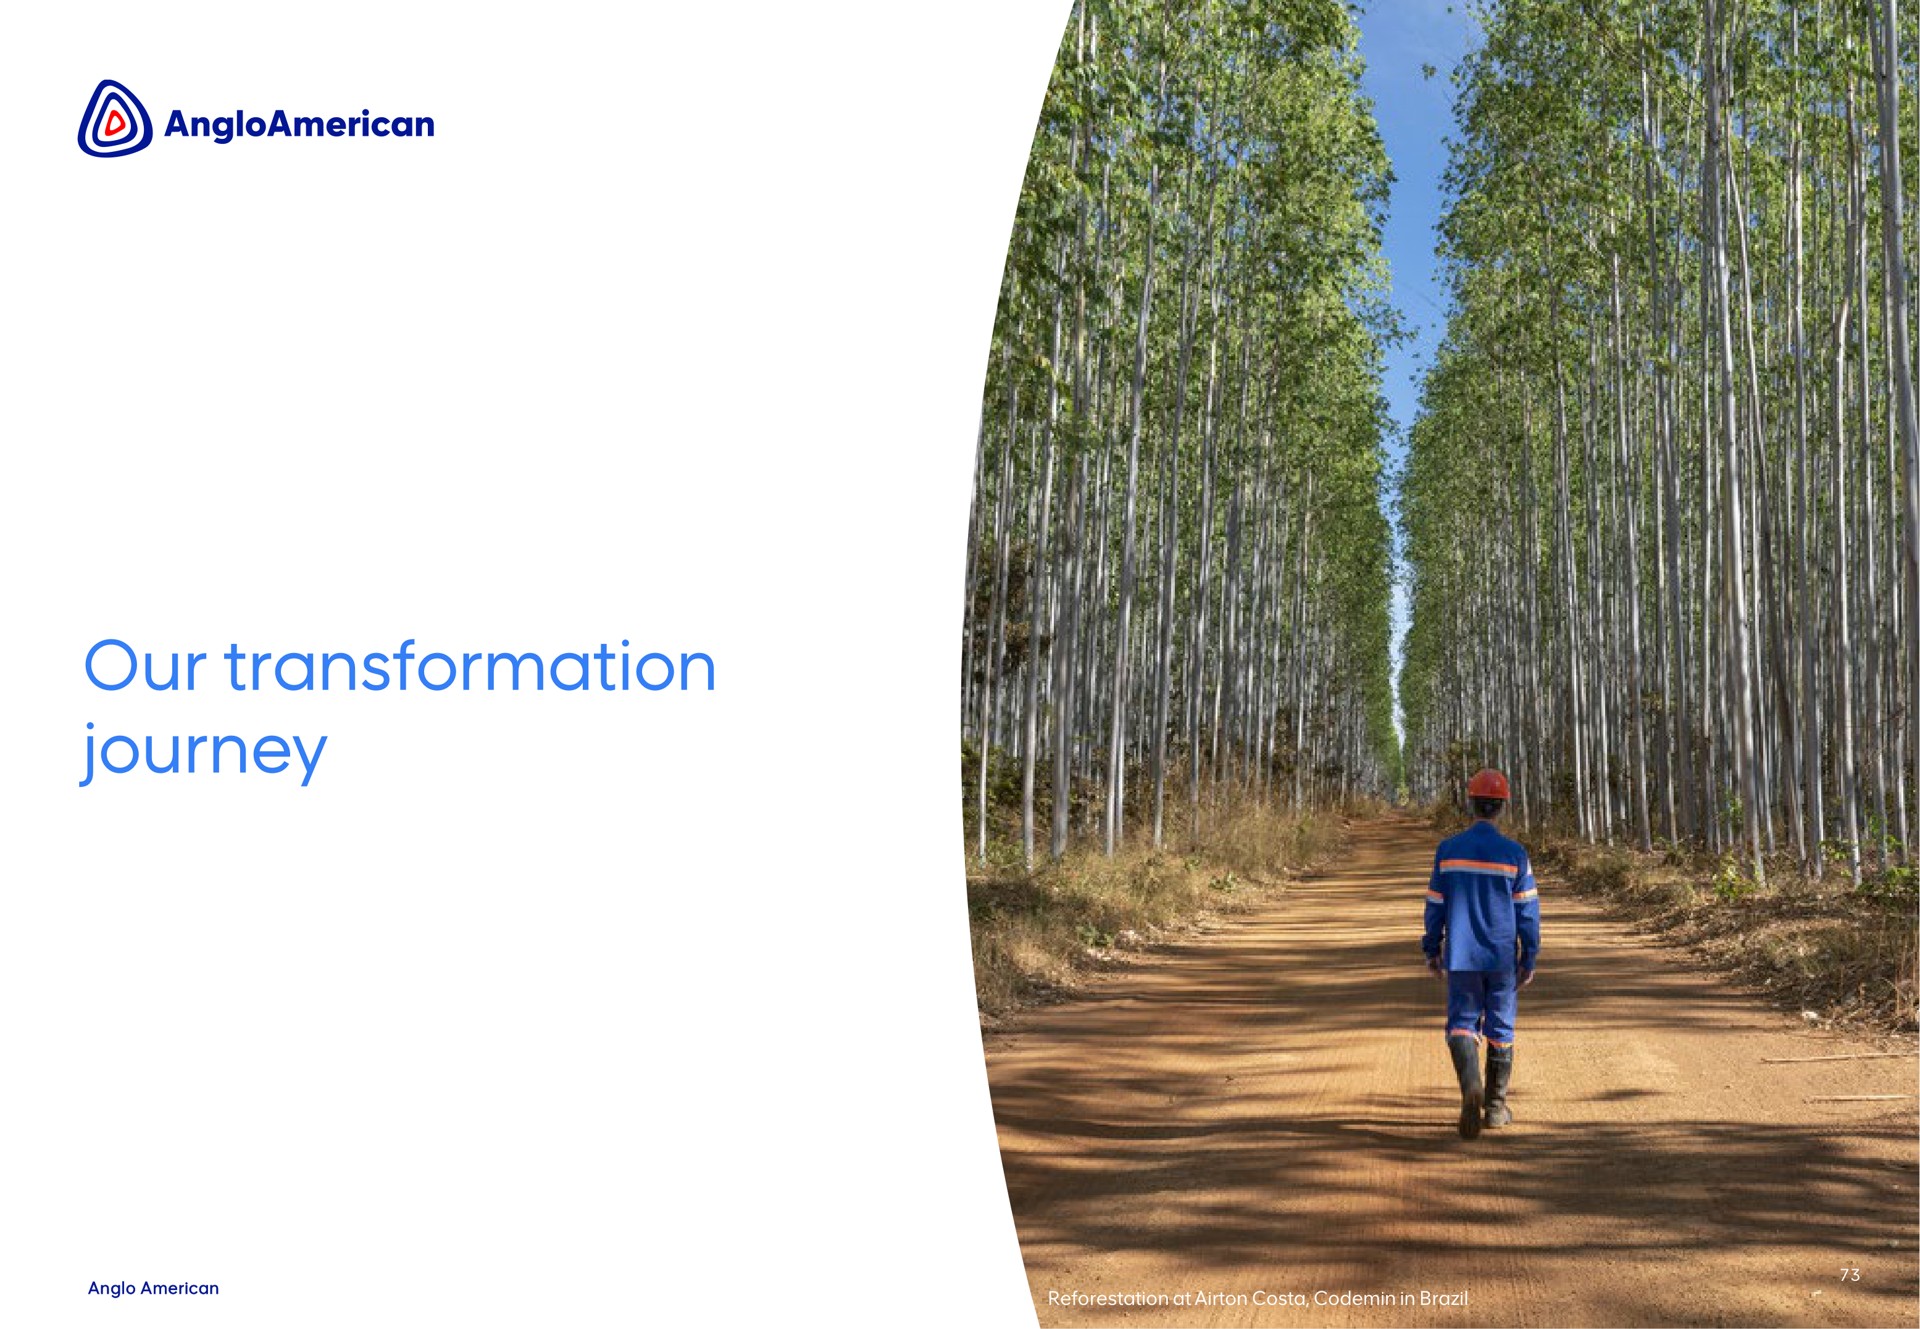 our transformation journey | AngloAmerican